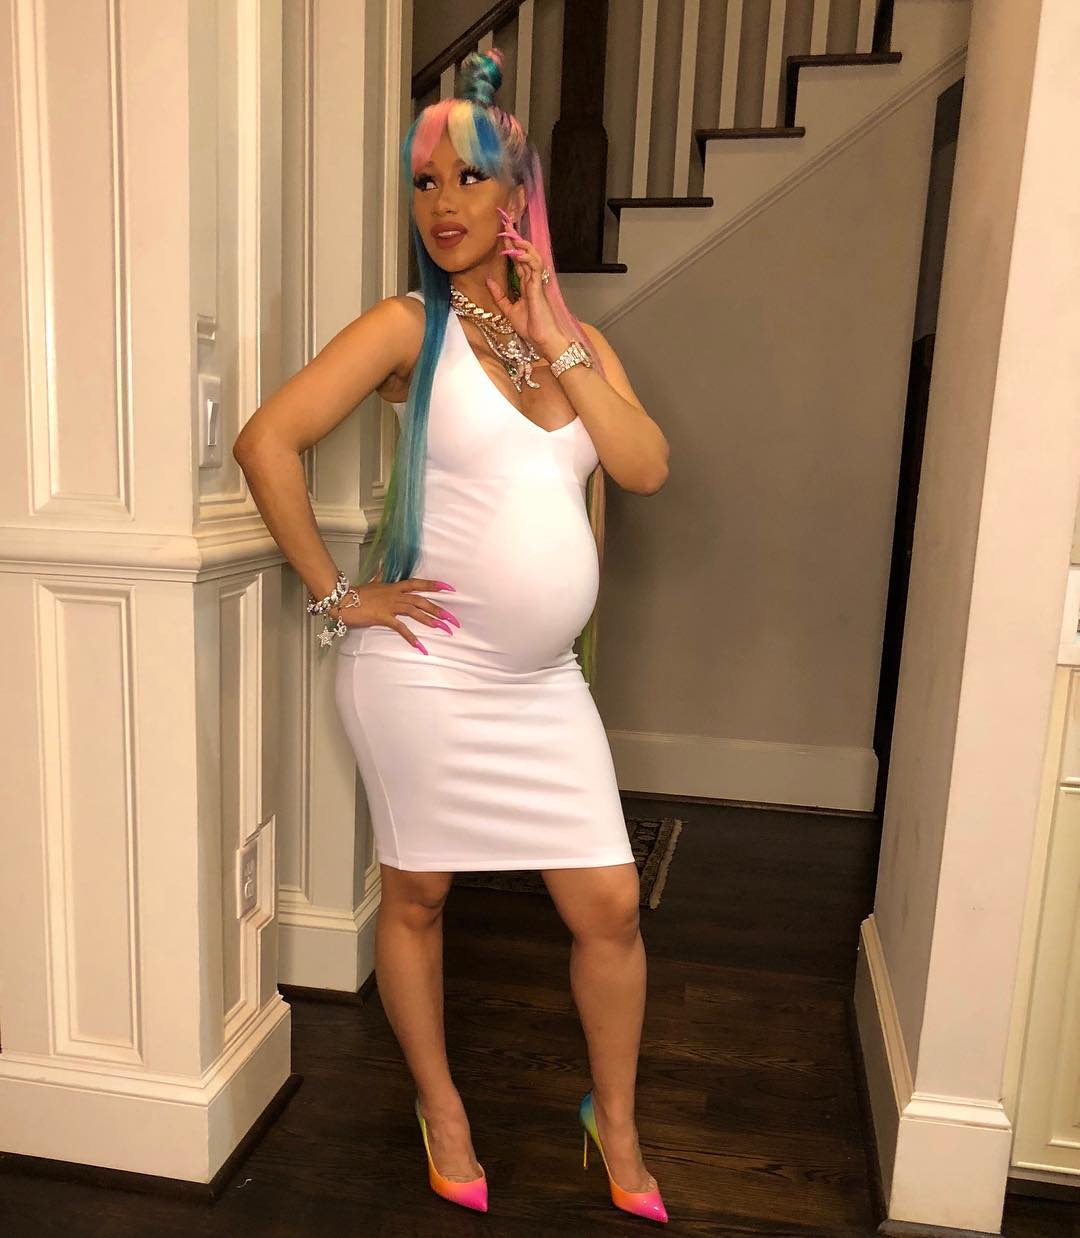 Cardi B matches her hair with her shoe as she shows off her bump at 8 months.